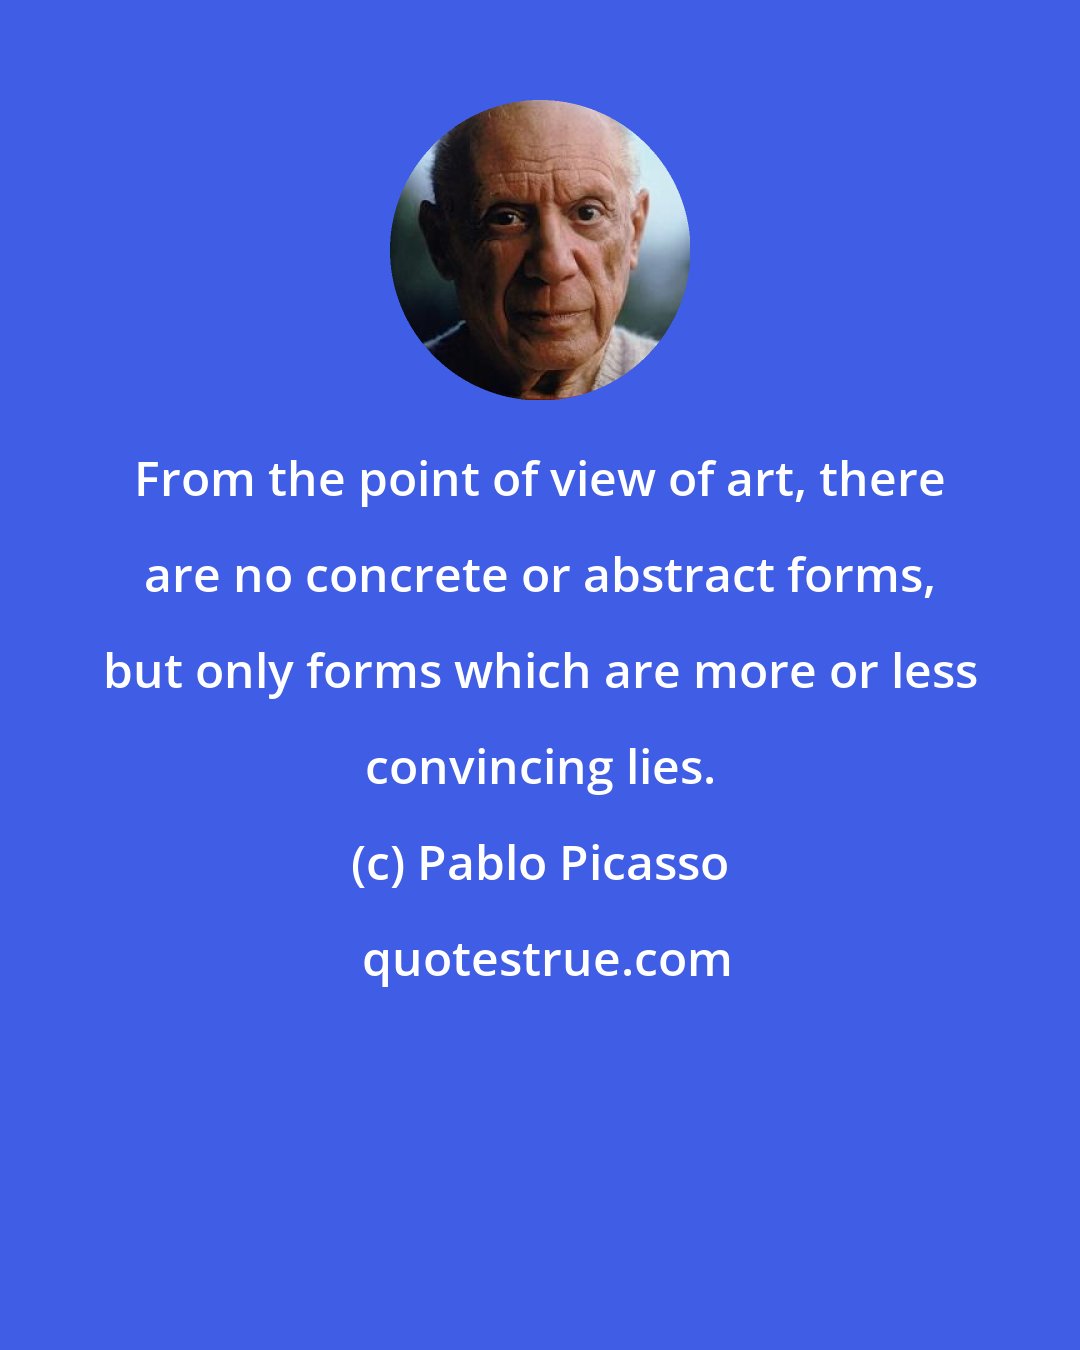 Pablo Picasso: From the point of view of art, there are no concrete or abstract forms, but only forms which are more or less convincing lies.